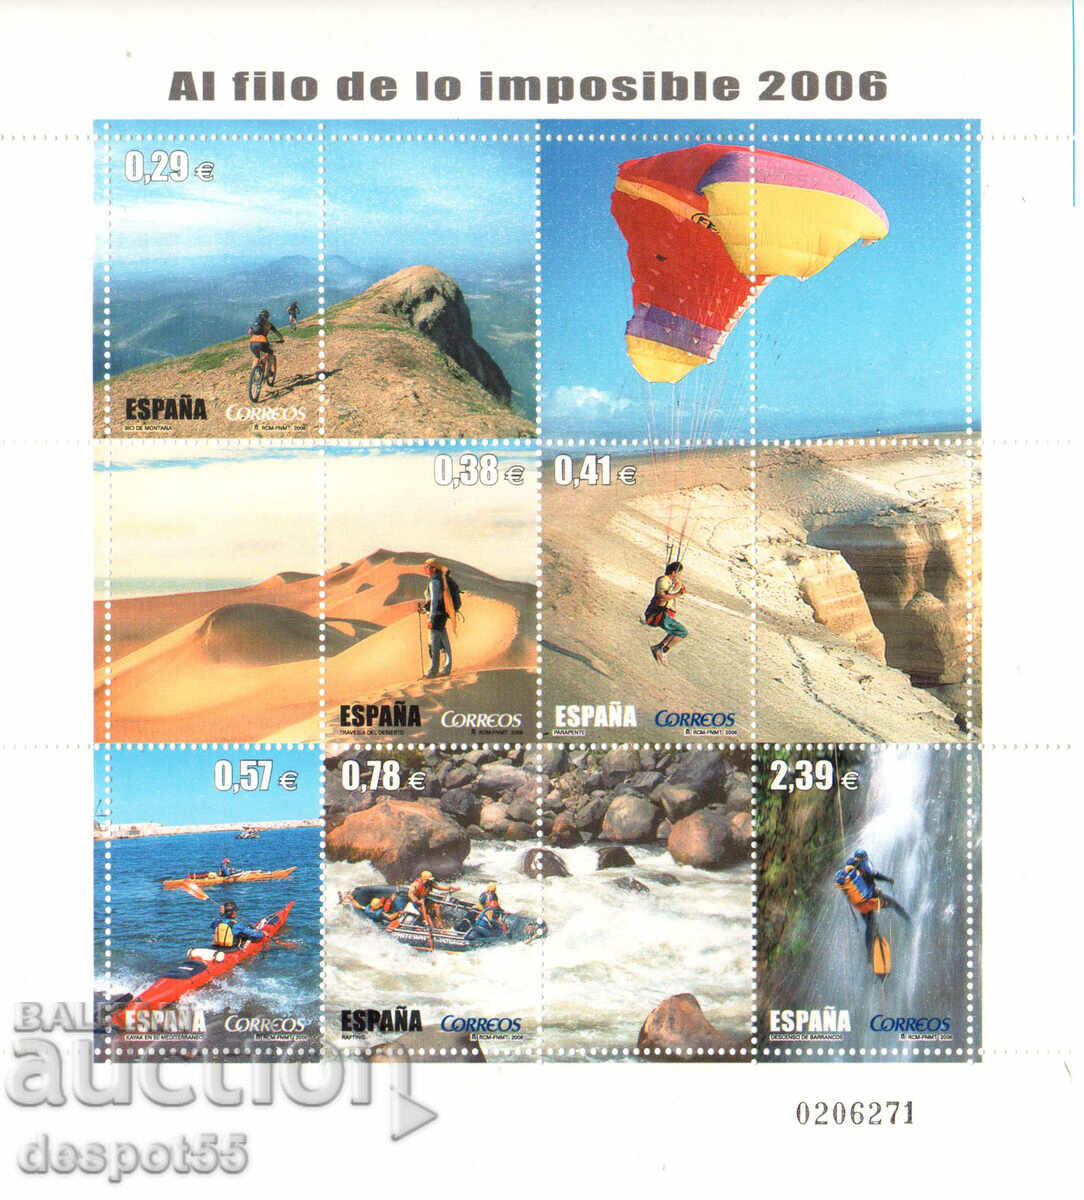 2006. Spain. On the edge of the impossible - extreme sports.